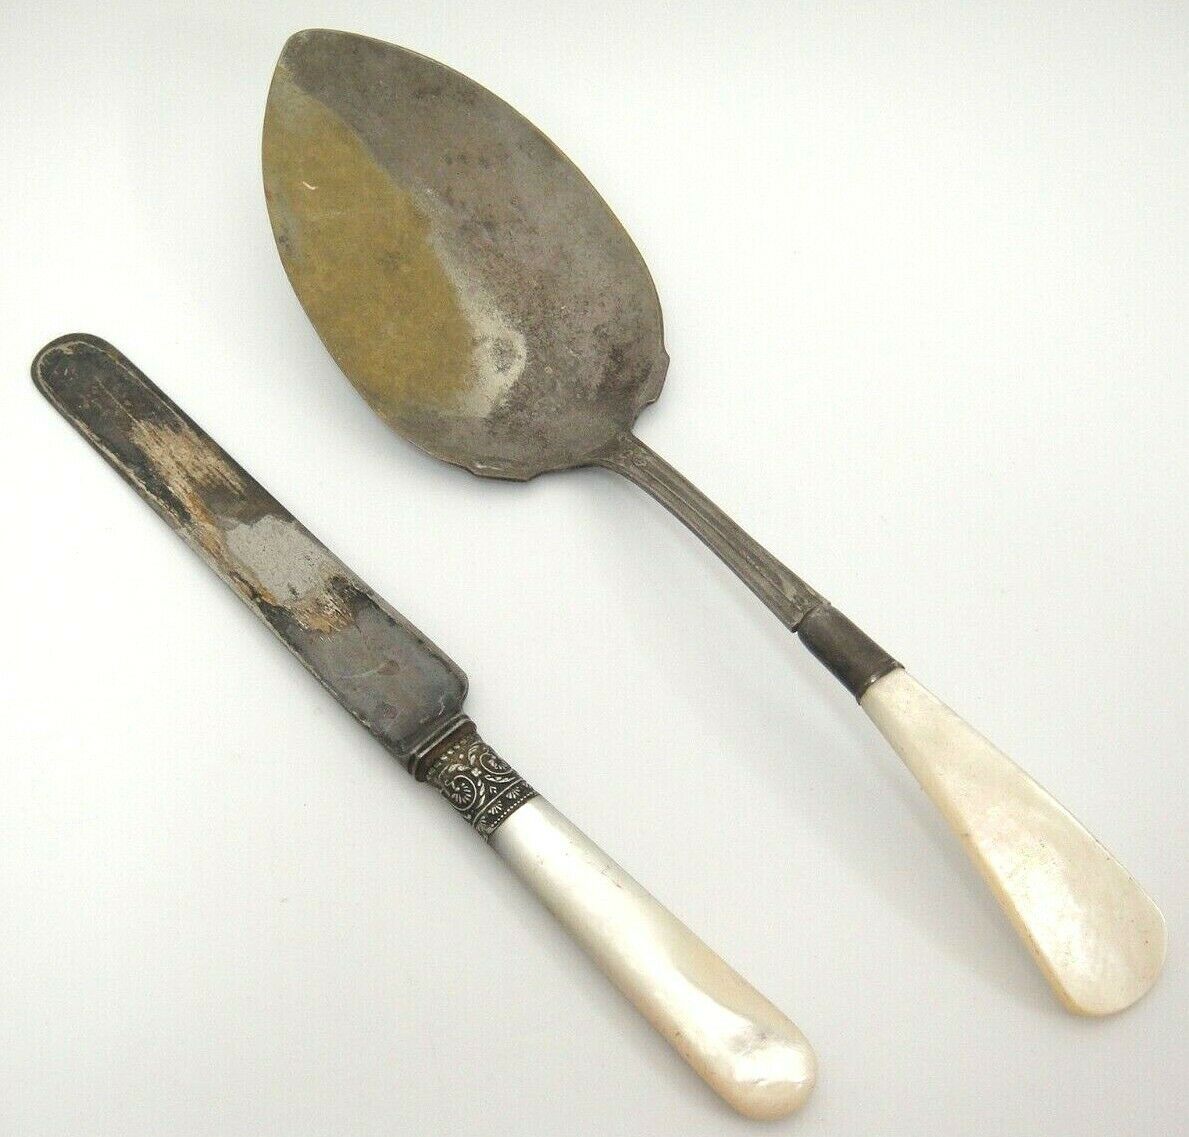 Primary image for Antique Sheffield Server and J Russell Knife with Mother of Pearl Handles Lot 2